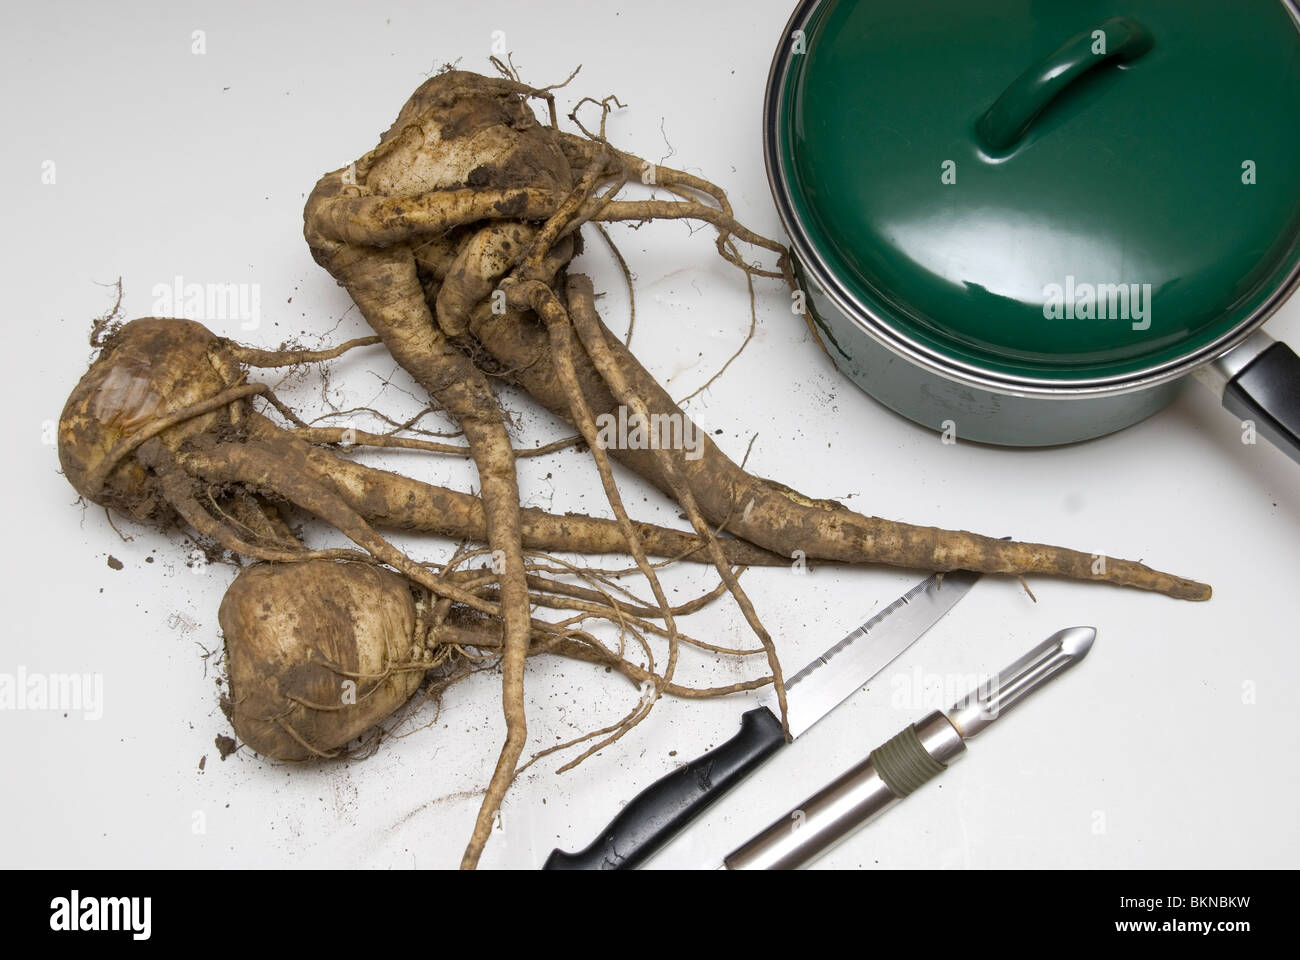 Home grown Parsnips with twisted multiple roots next to a pan. Stock Photo